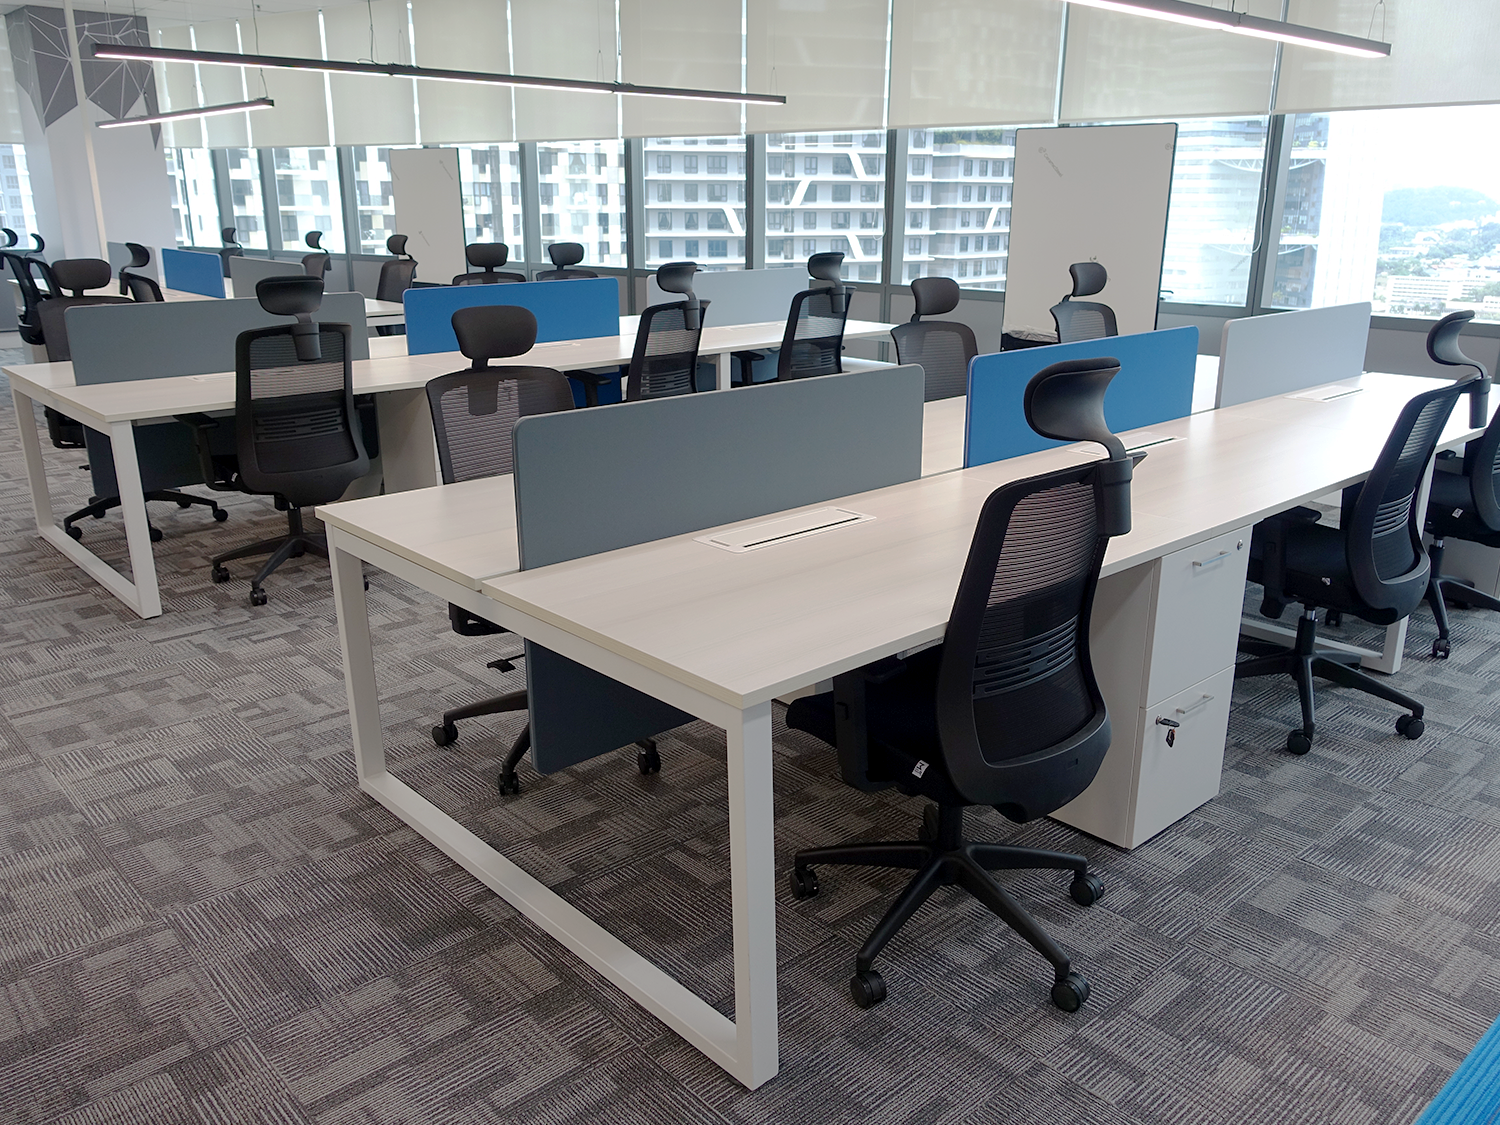 Virtuos (KL) | Office Furniture Project Malaysia